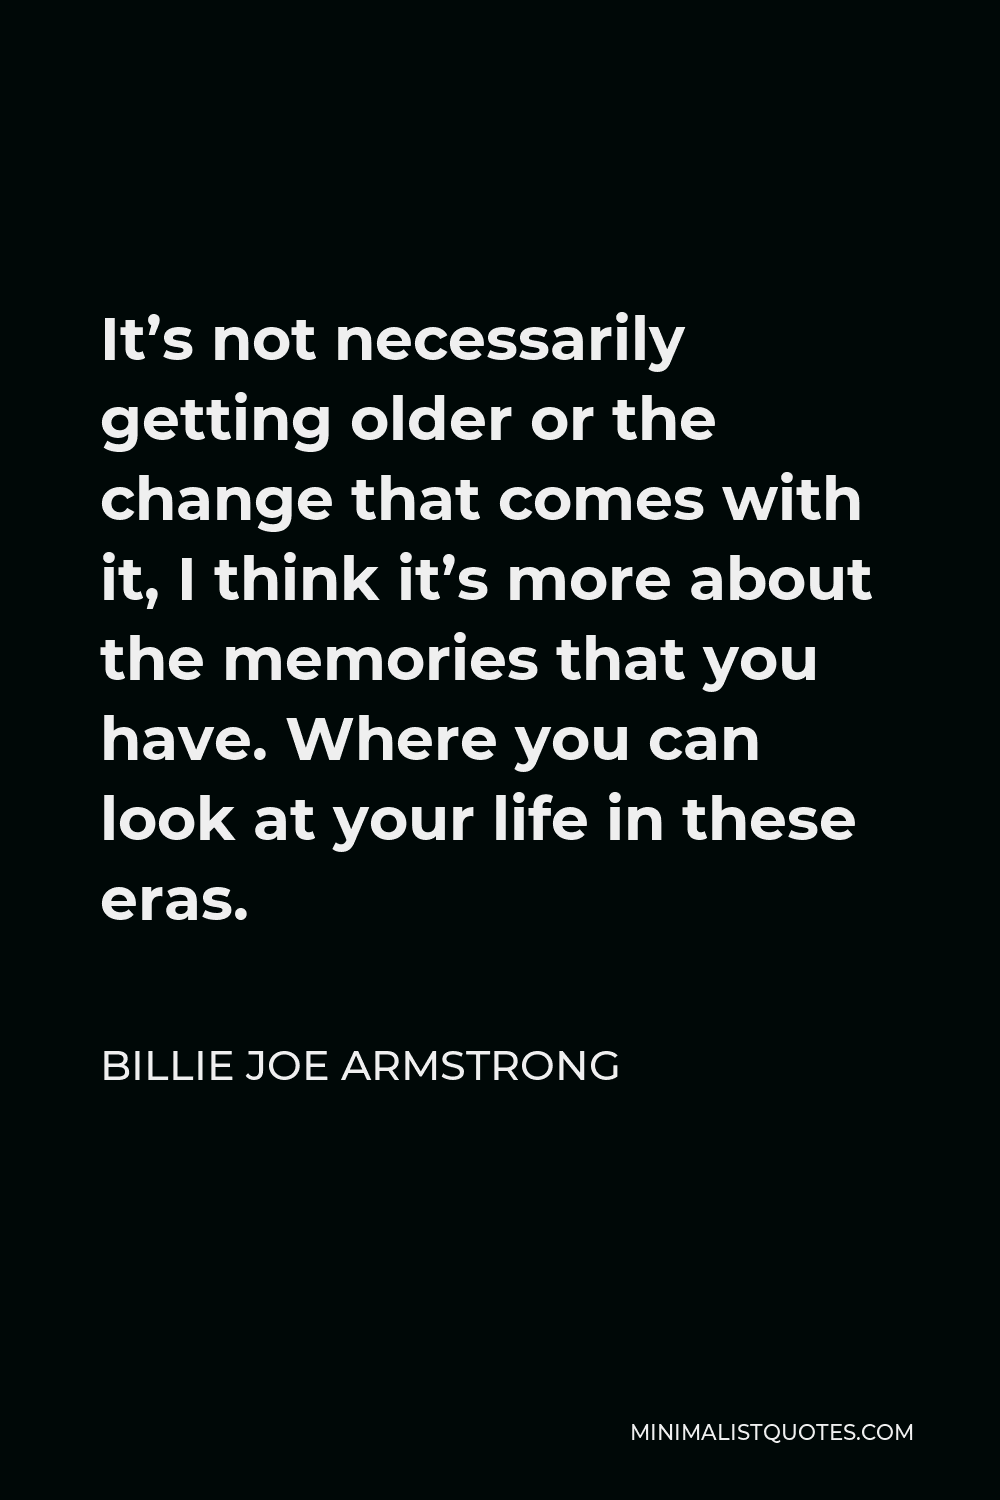 Billie Joe Armstrong Quote - It’s not necessarily getting older or the change that comes with it, I think it’s more about the memories that you have. Where you can look at your life in these eras.